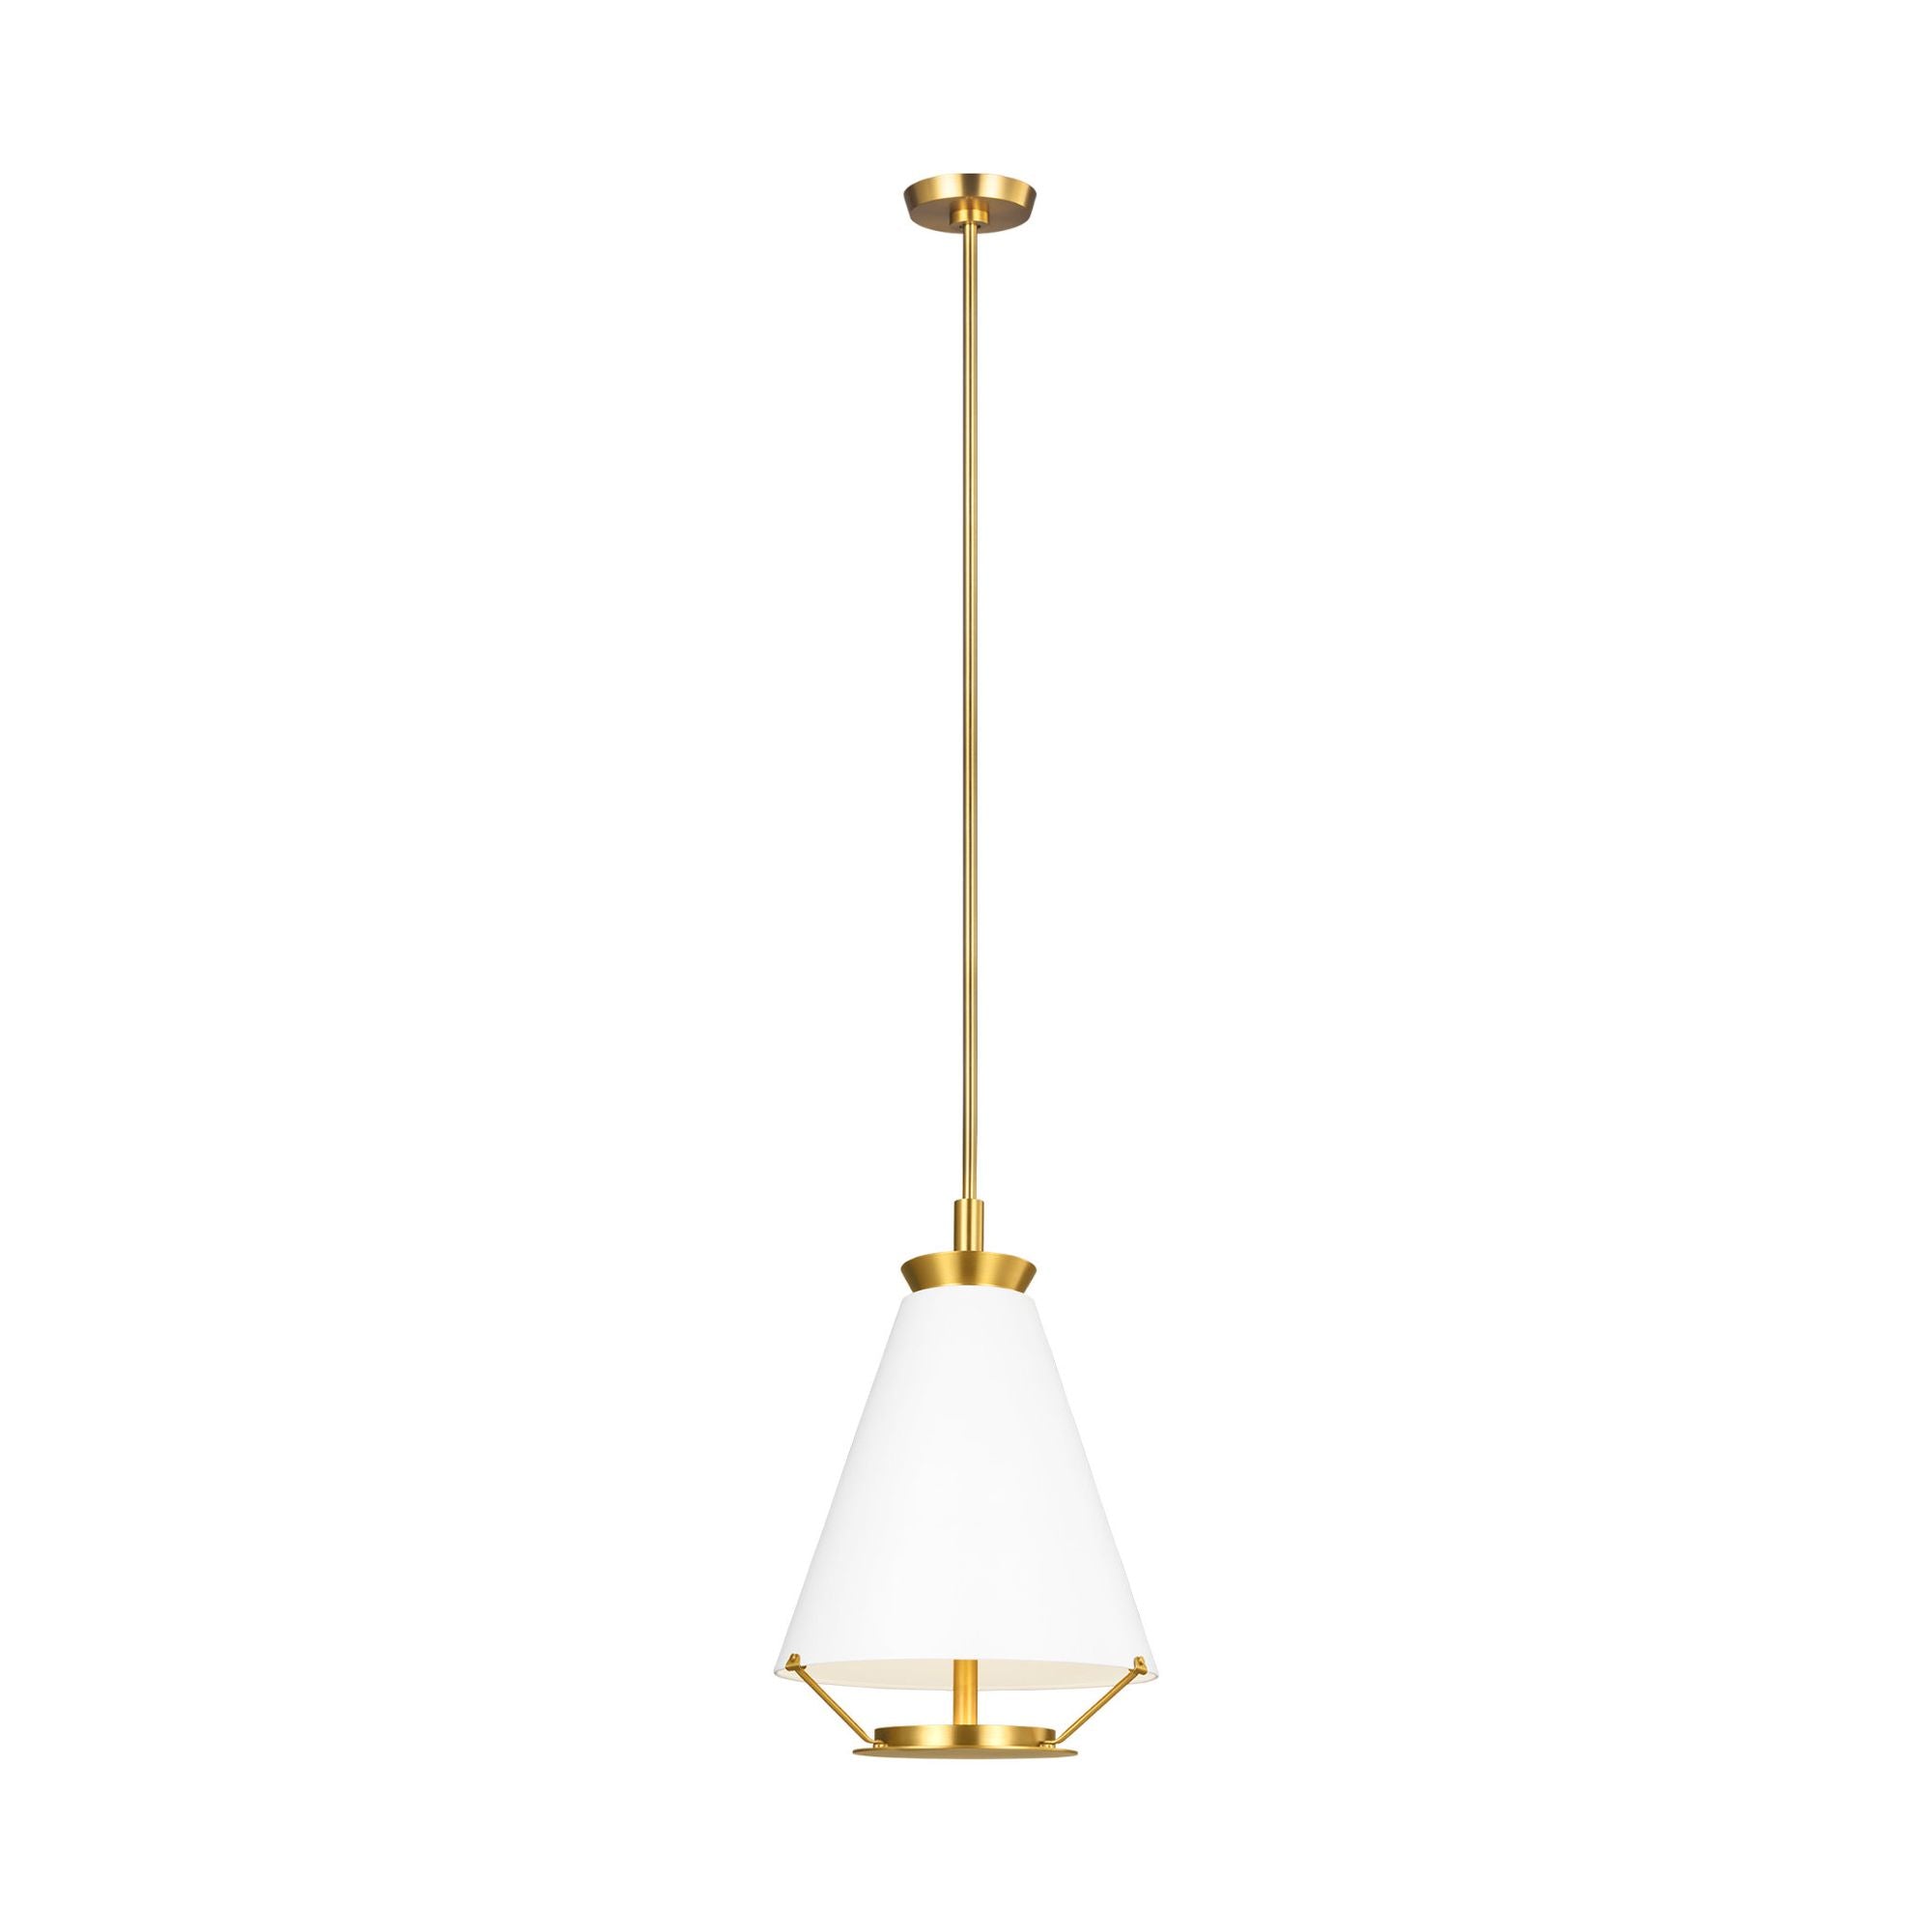 Chapman & Myers Ultra Light Tall Pendant in Burnished Brass